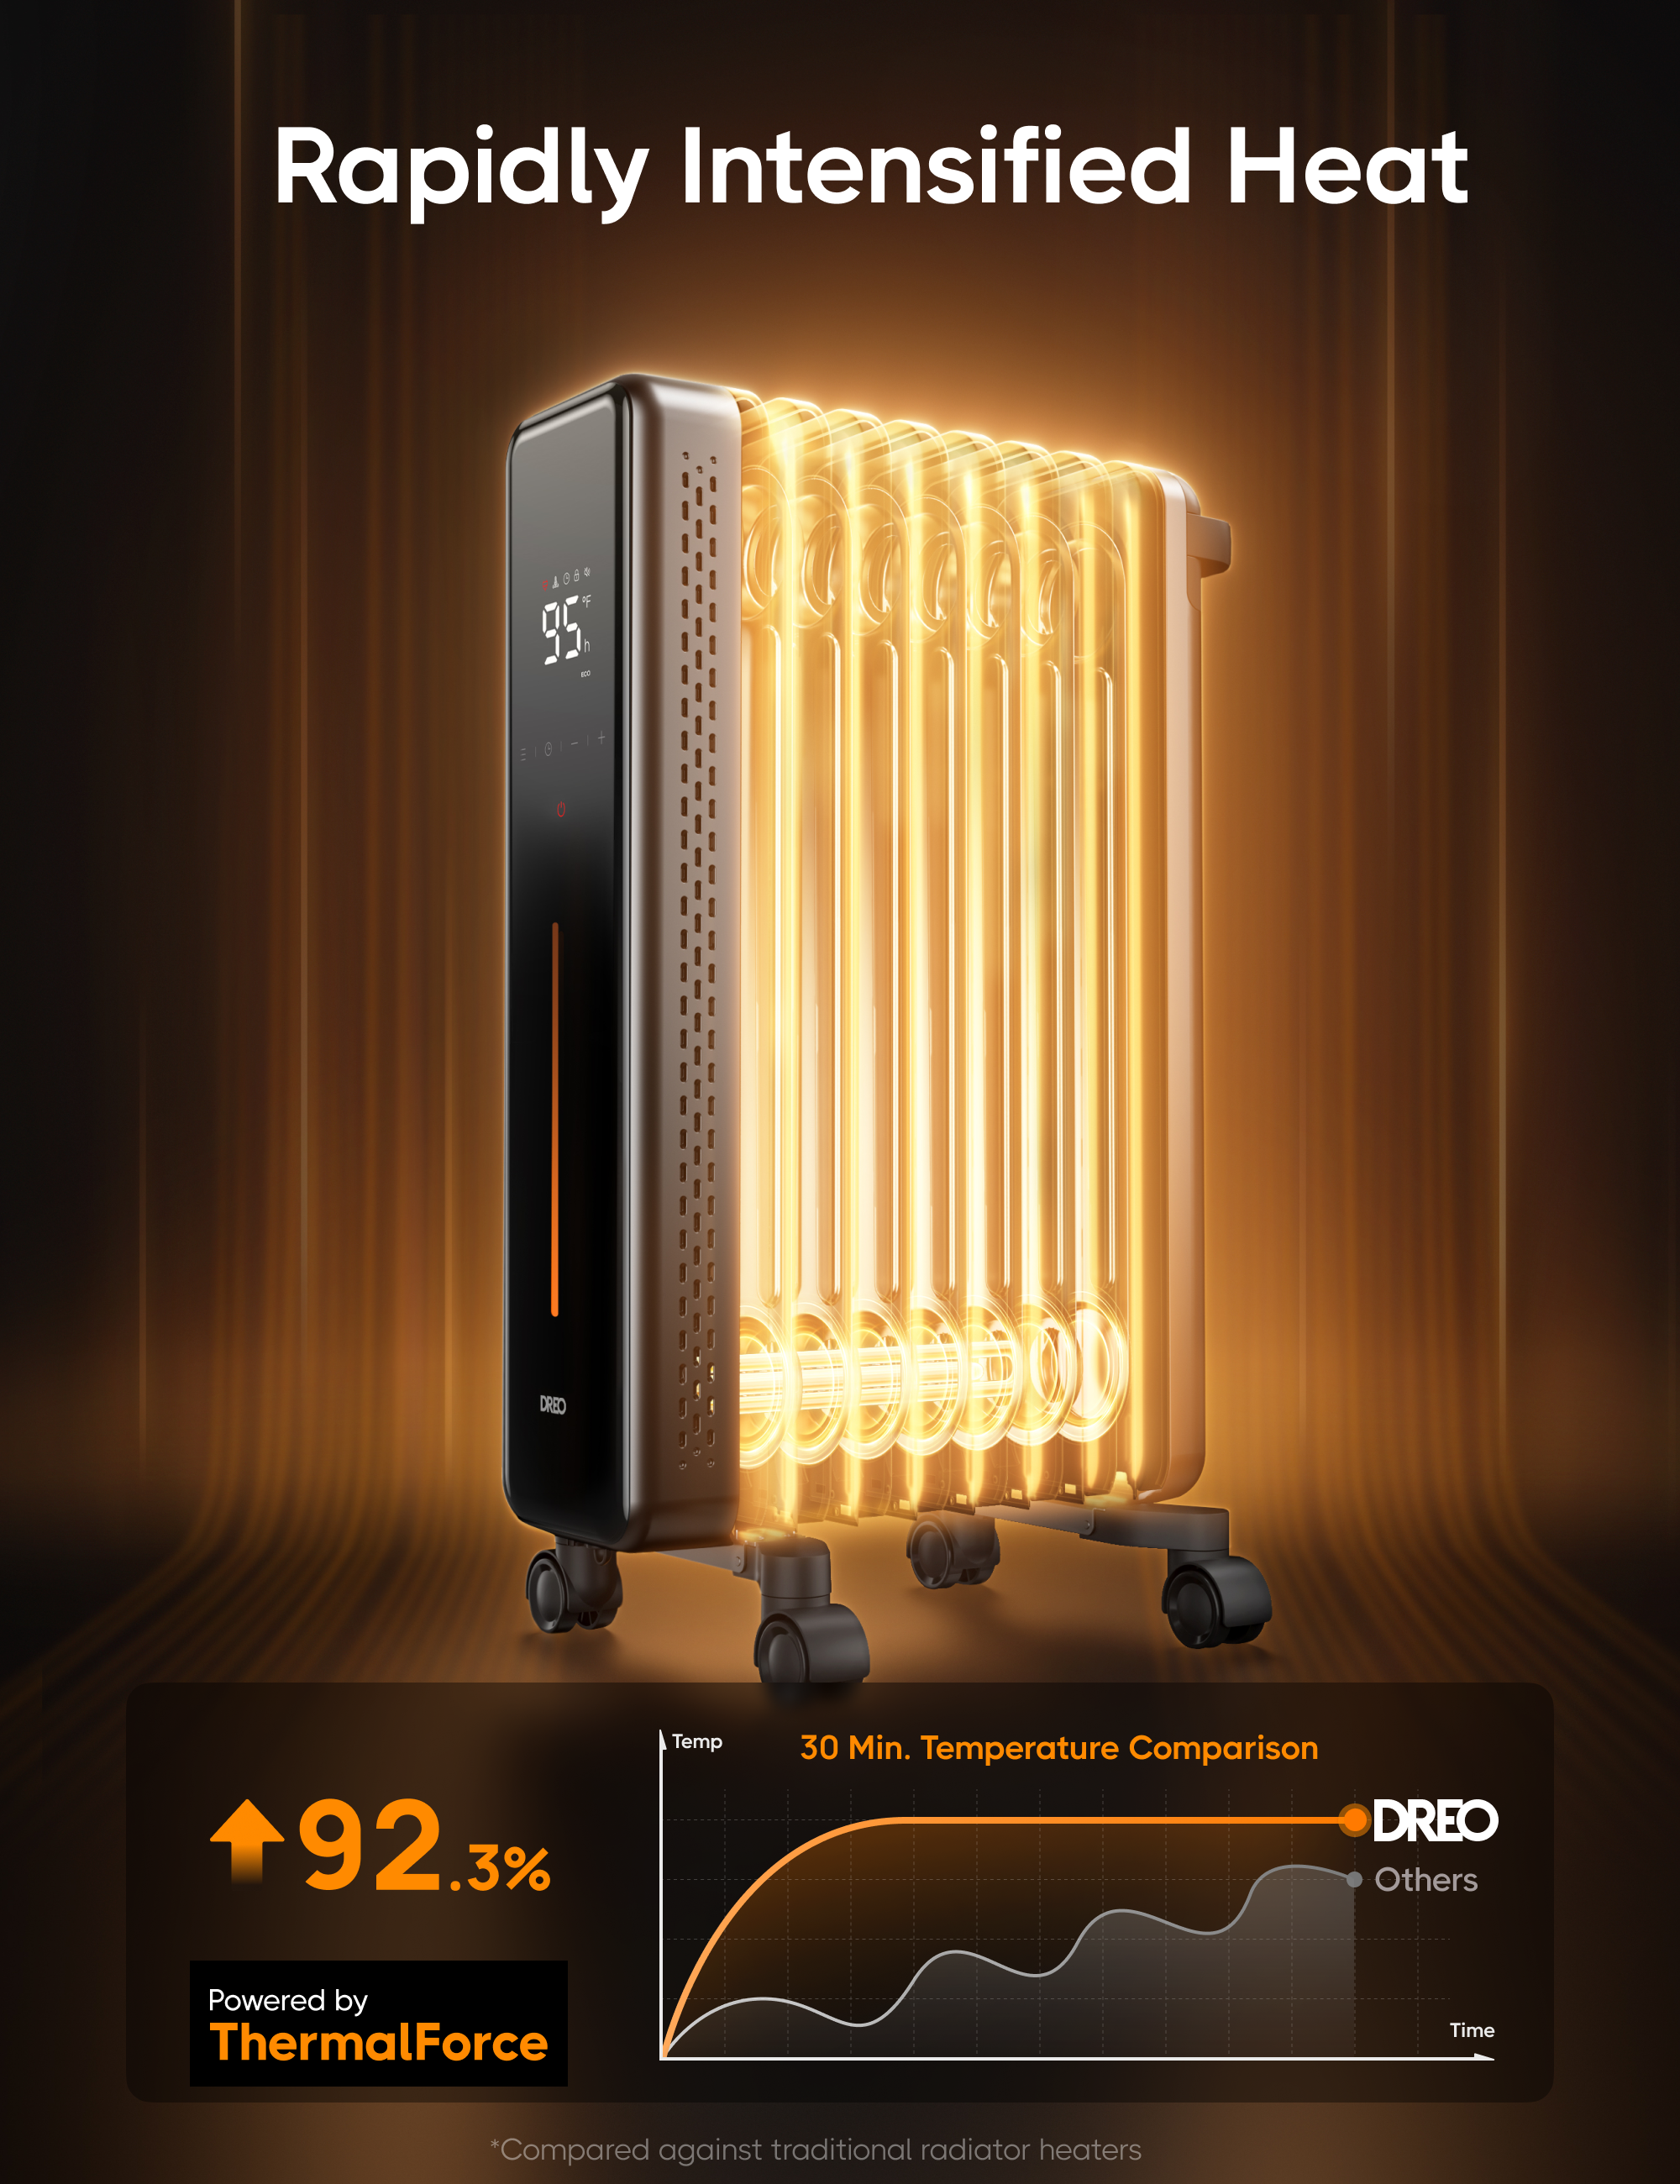 Customizable heating options as well as heat distribution OH521